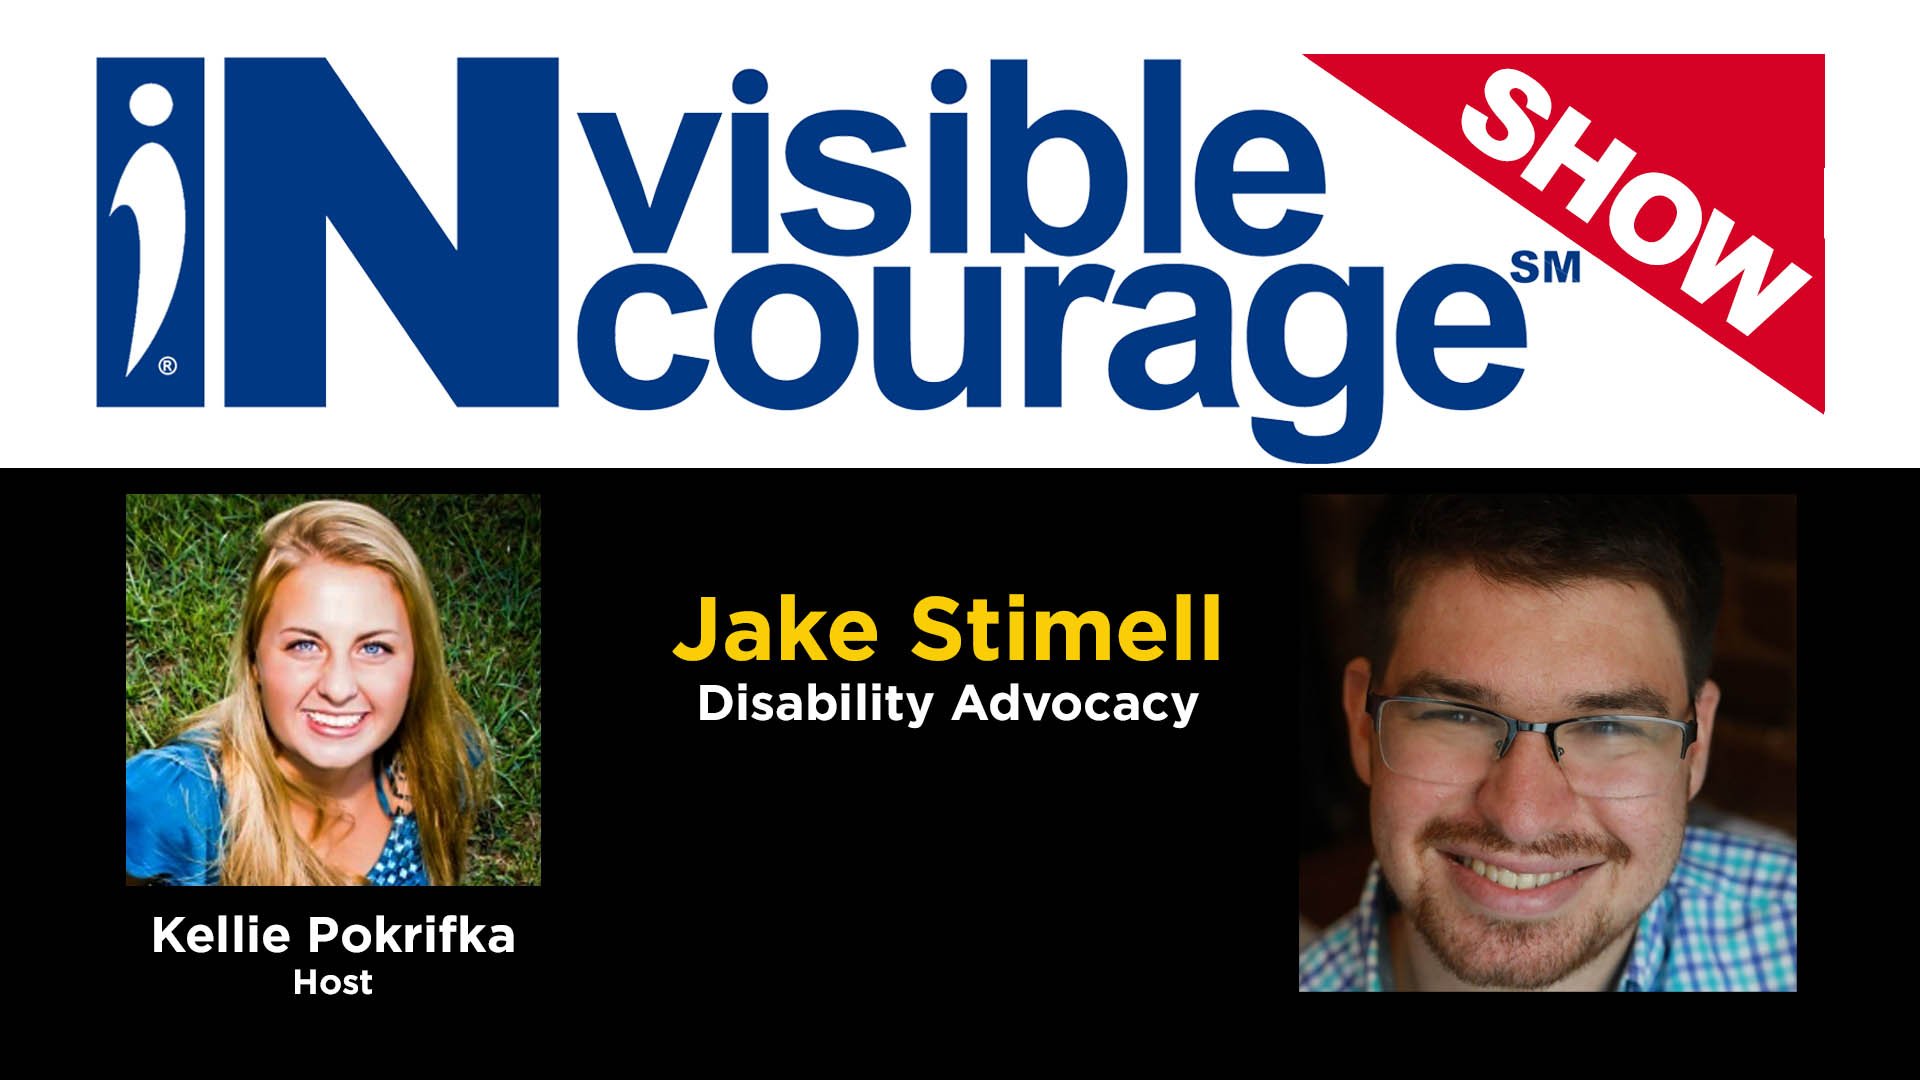 InVisible InCourage Show Episode 7 - Disability Advocate Jake Stimell - Invisible Disabilities Association